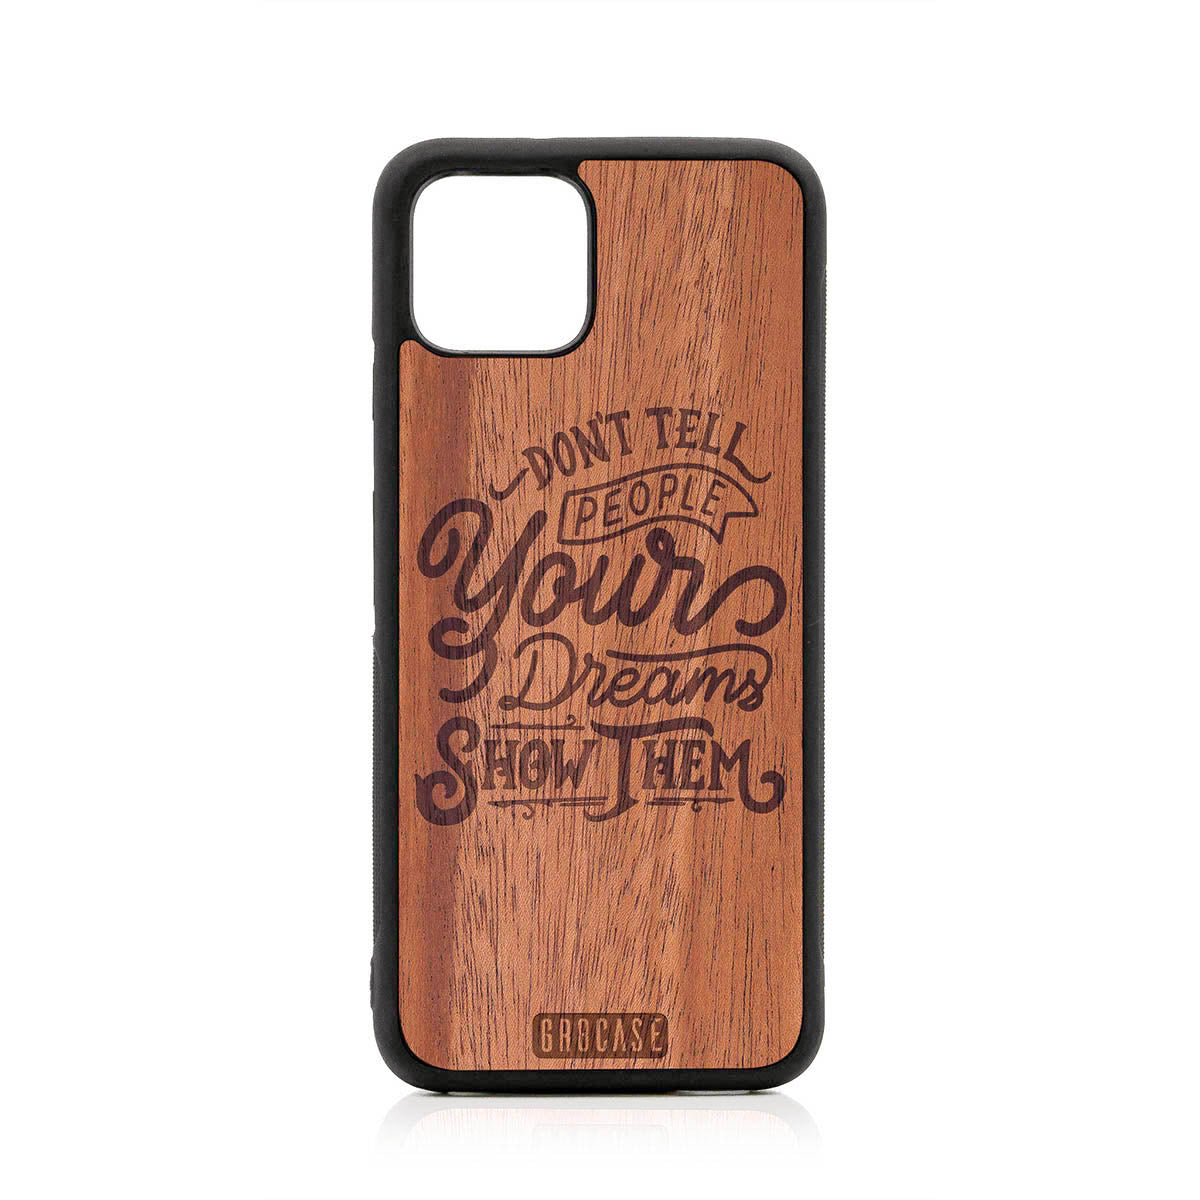 Don't Tell People Your Dreams Show Them Design Wood Case For Google Pixel 4 by GR8CASE